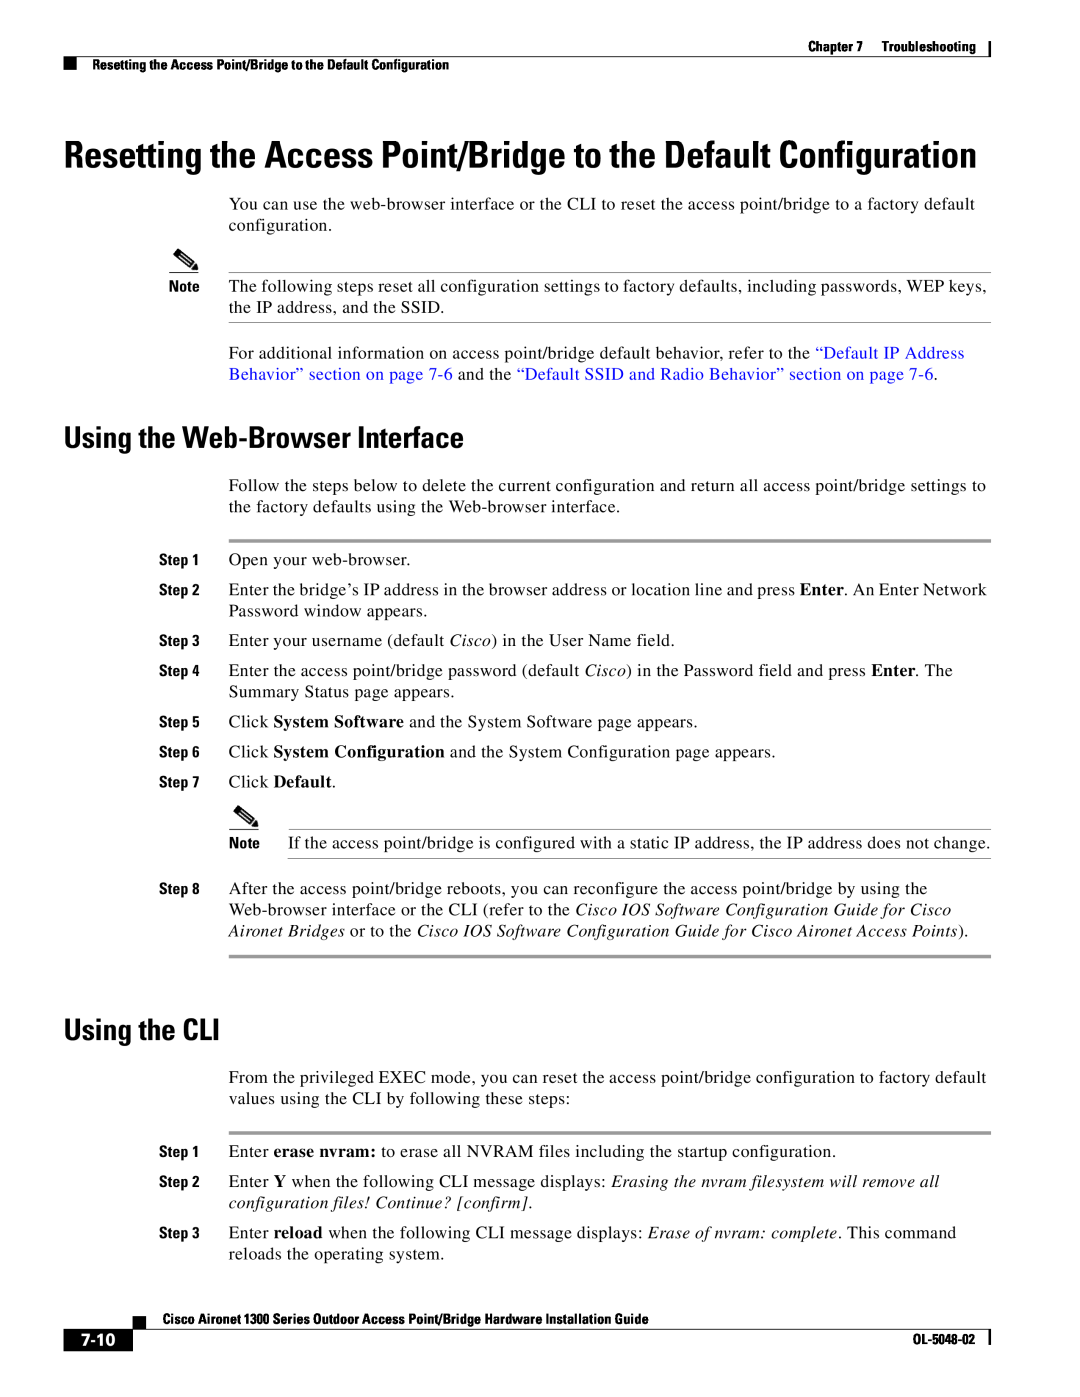 Cisco Systems 1300 Series manual Using the Web-Browser Interface, Using the CLI, 7-10 